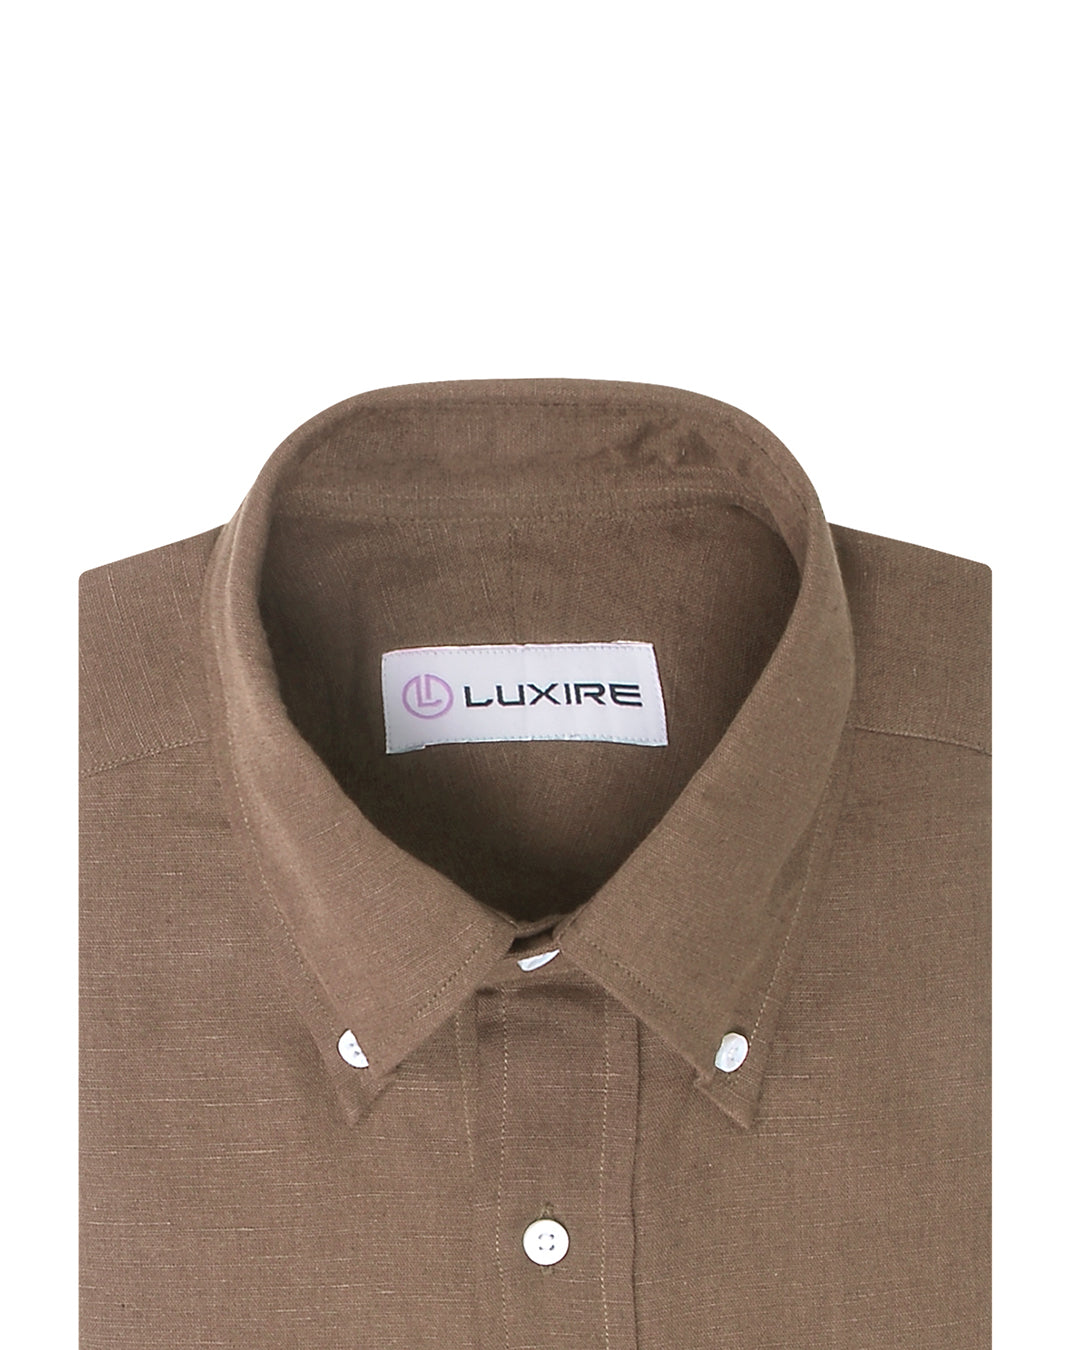 Collar of the custom linen shirt for men in light brown by Luxire Clothing